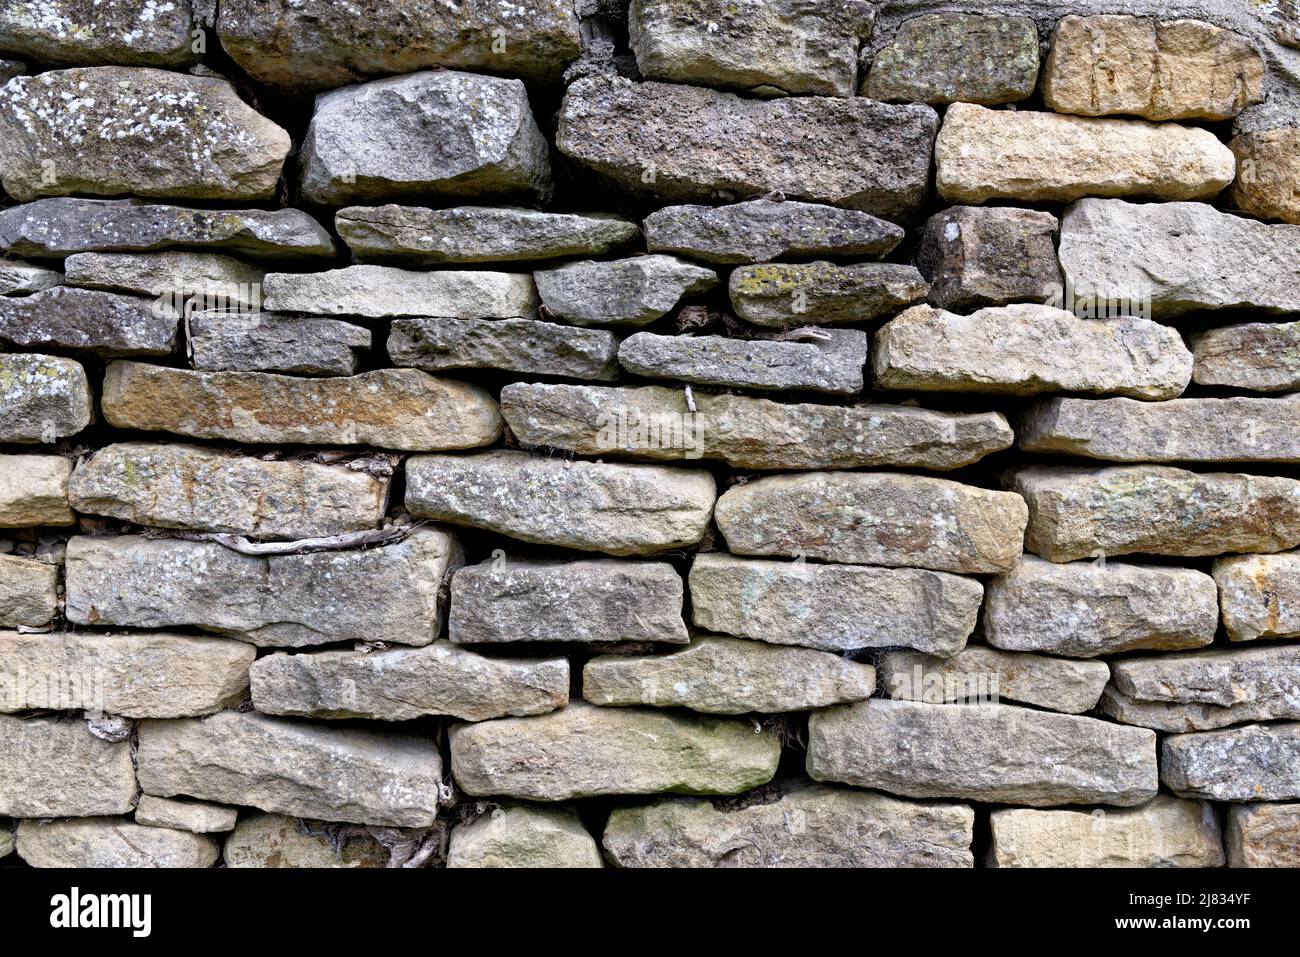 Background - A dry stone wall built with Cotswold stone at Burford in the Cotswolds, Gloucestershire, United Kingdom Stock Photo